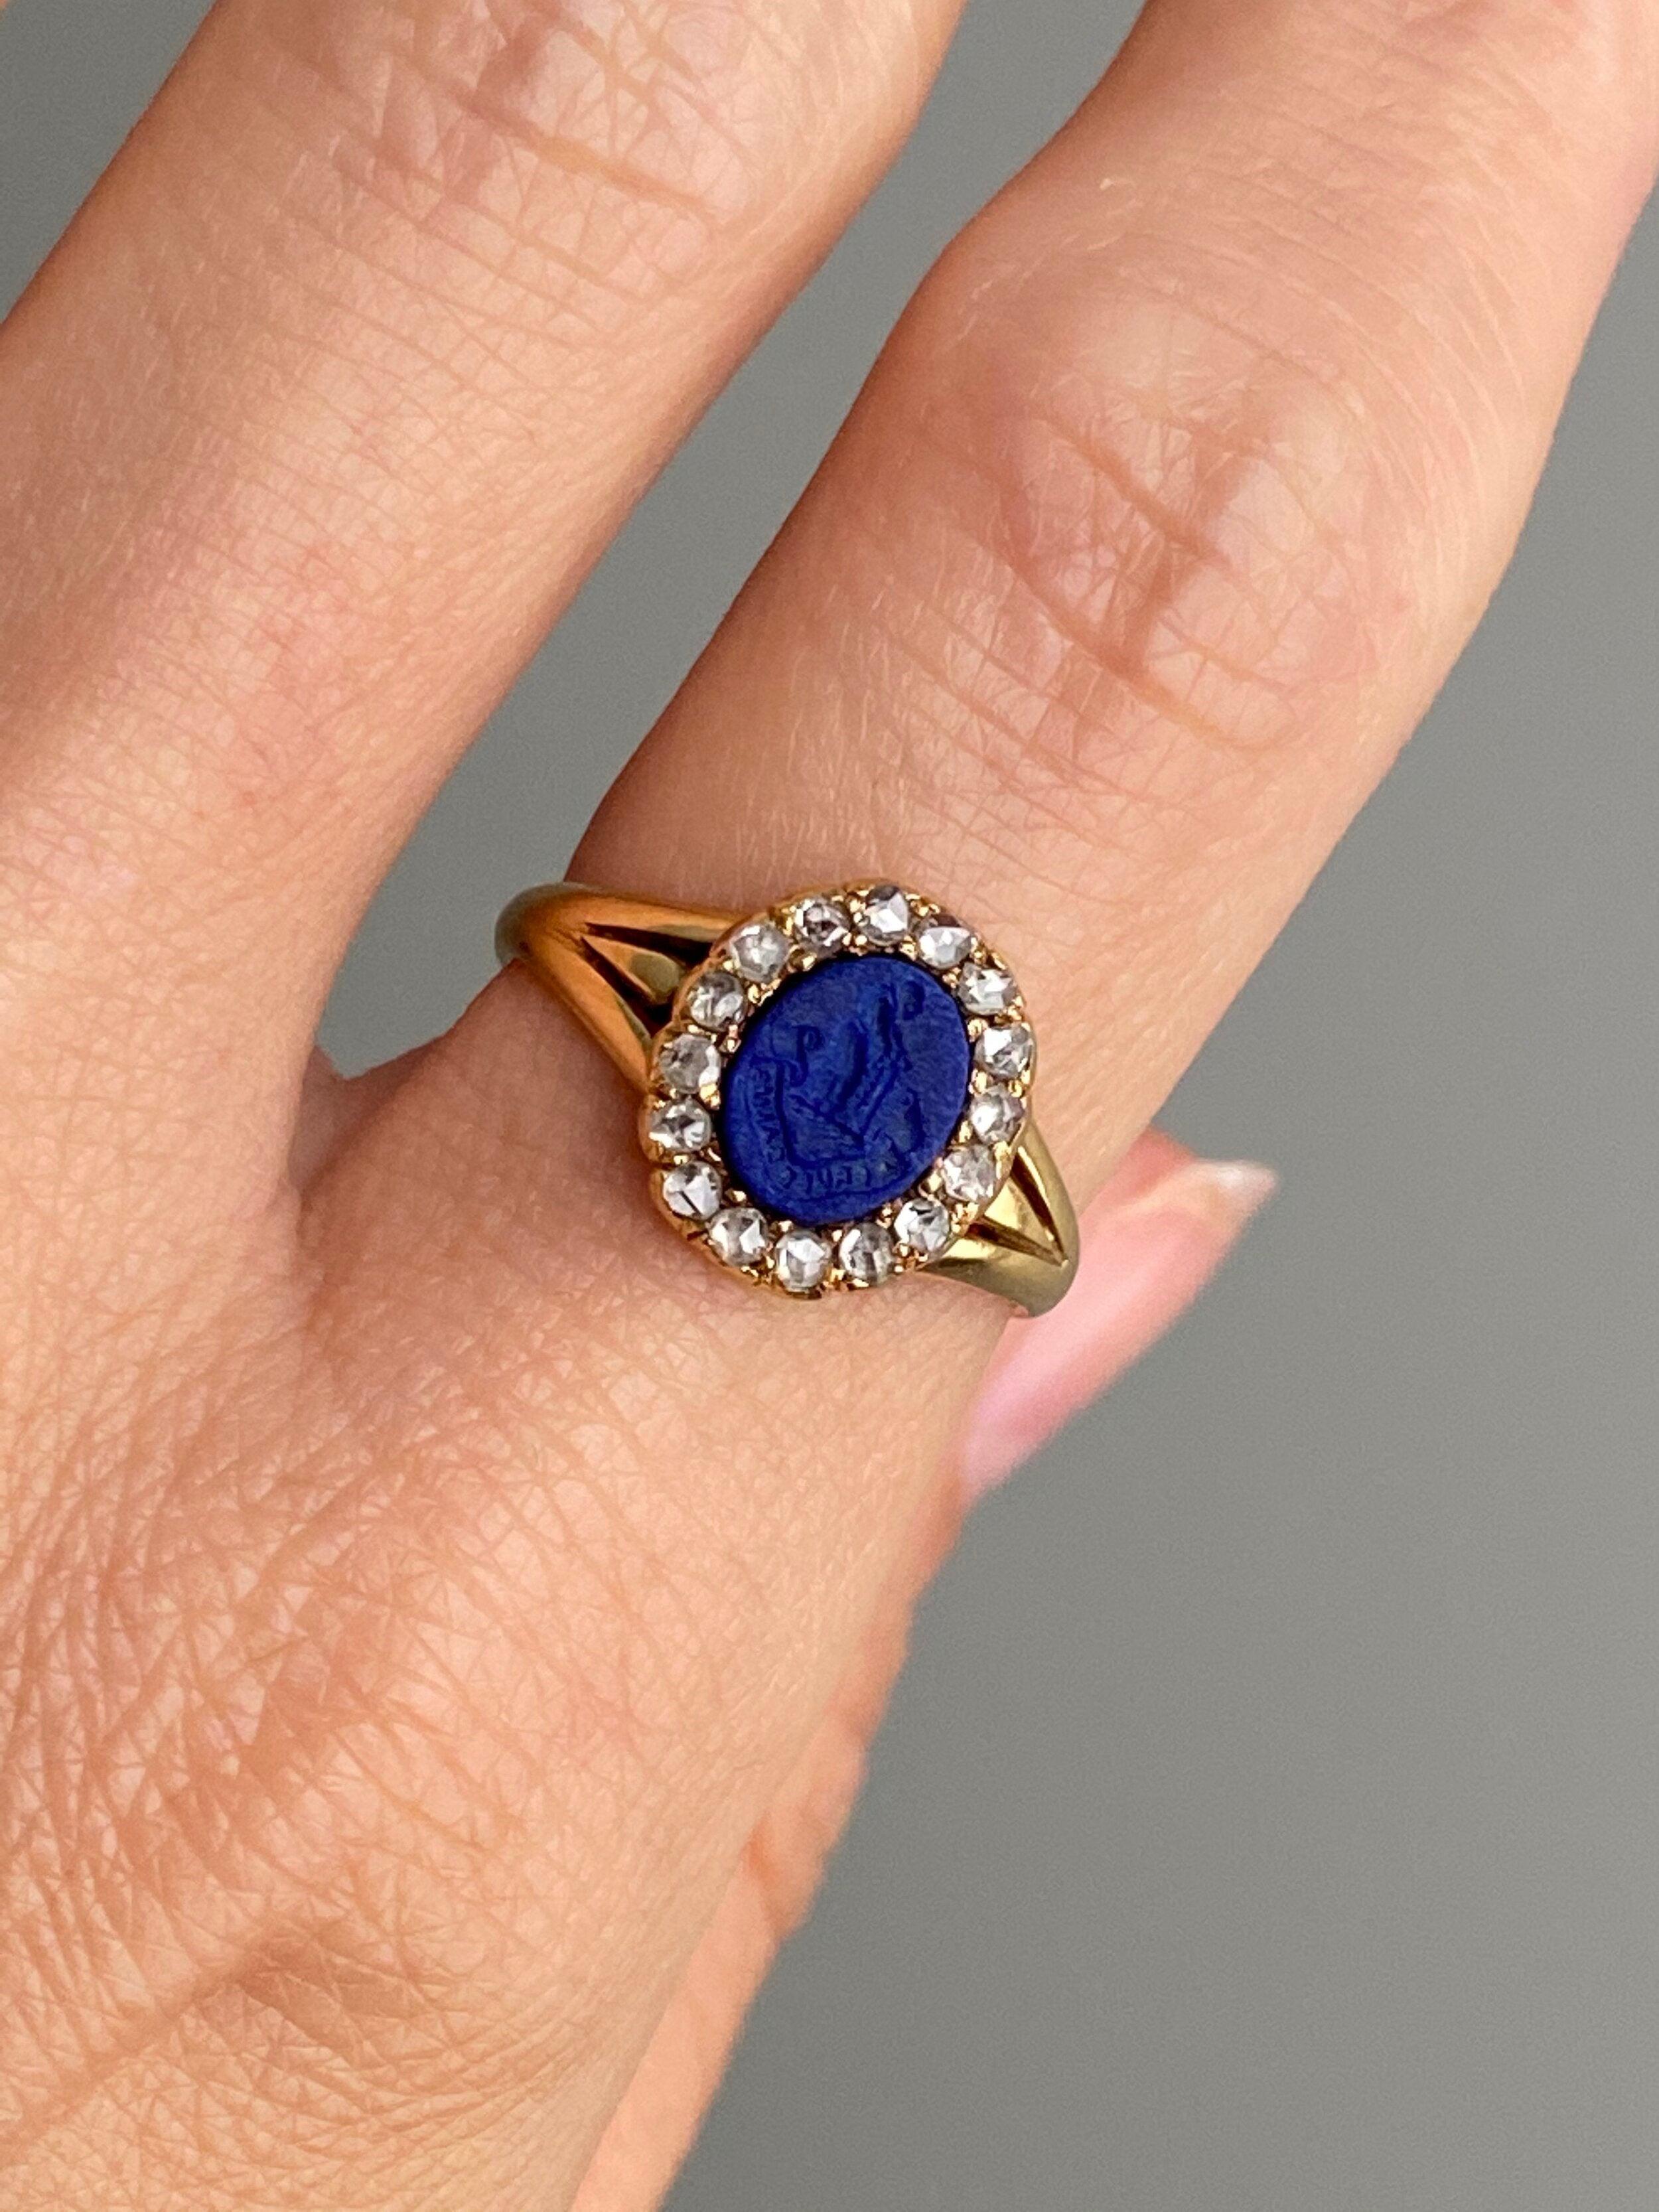 Victorian 18K Lapis Intaglio Ring with Rose Cut Diamond Surround - A Cruce Salus In Good Condition For Sale In Hummelstown, PA